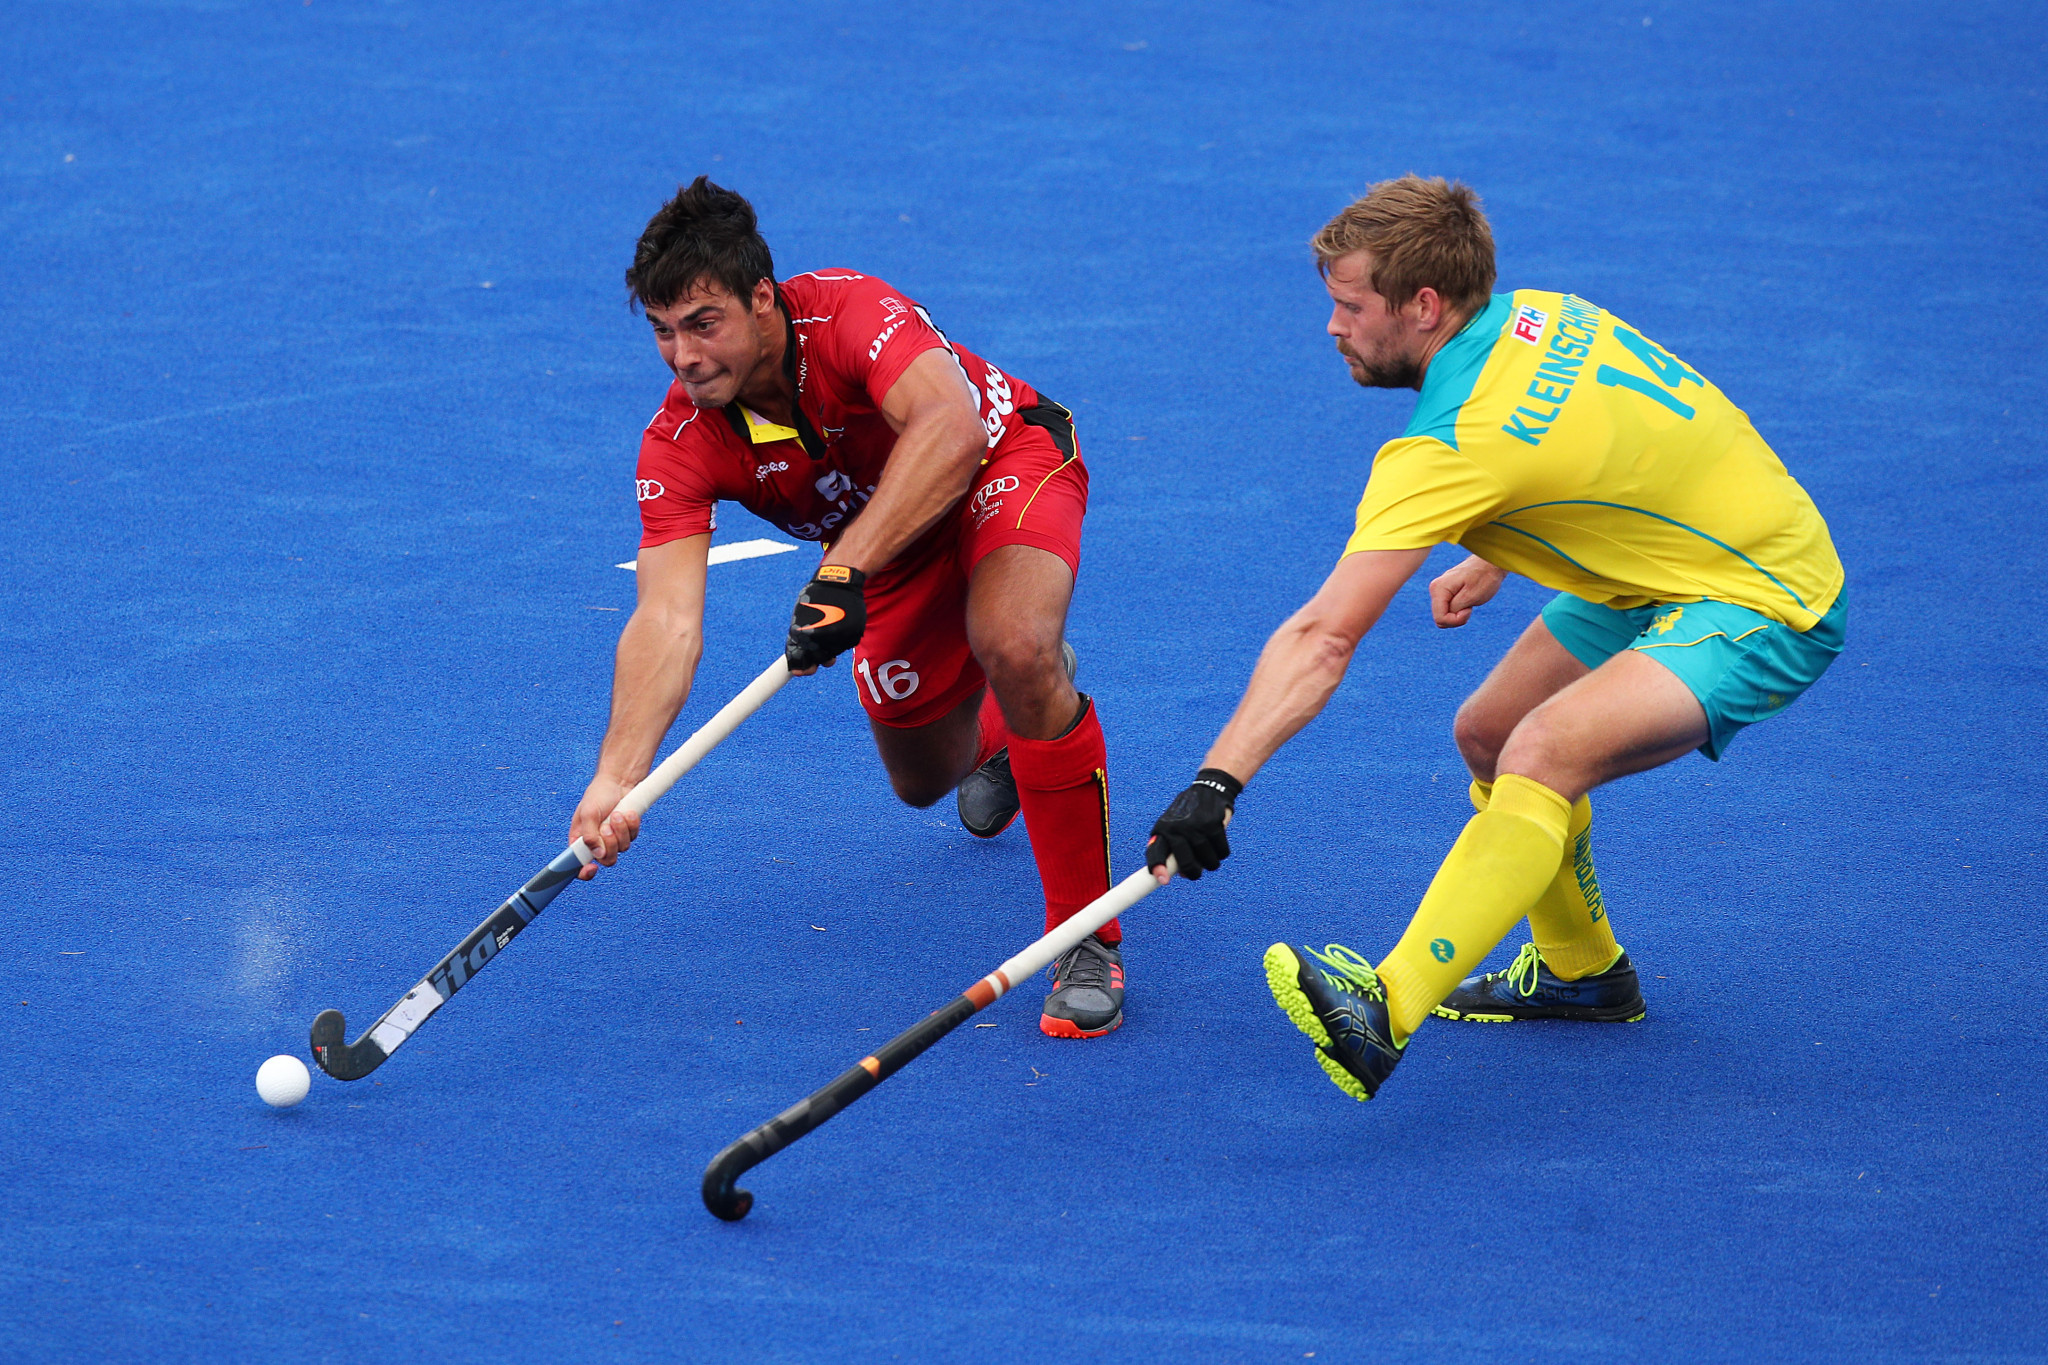 Belgium's men and women recorded victories over hosts Australia in the FIH Pro League in Melbourne ©Getty Images